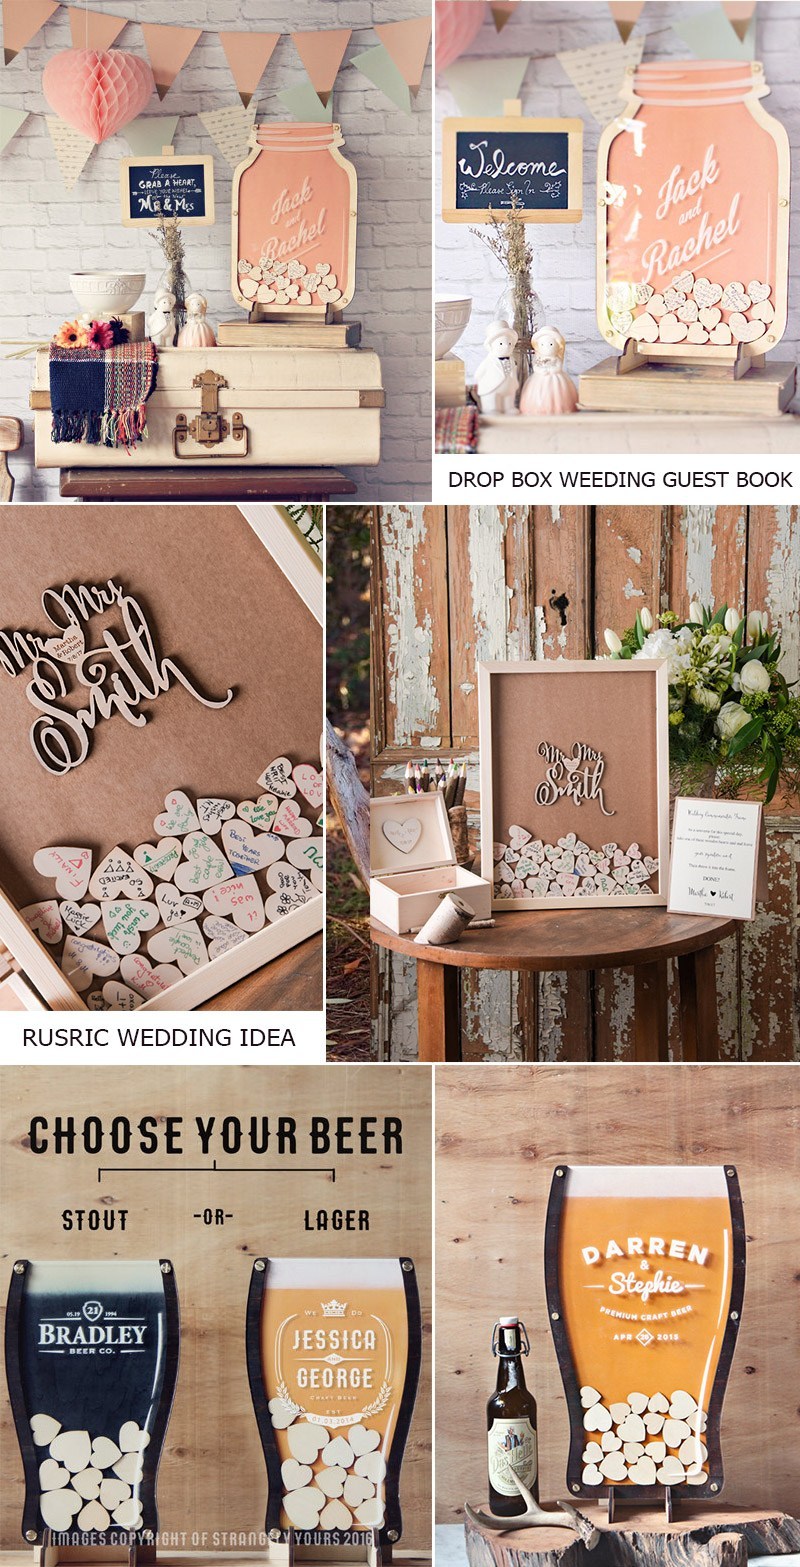 4 Beer Drop Hearts Pub wedding alternative to a wedding guest book Blush Pink Personalised Guestbook